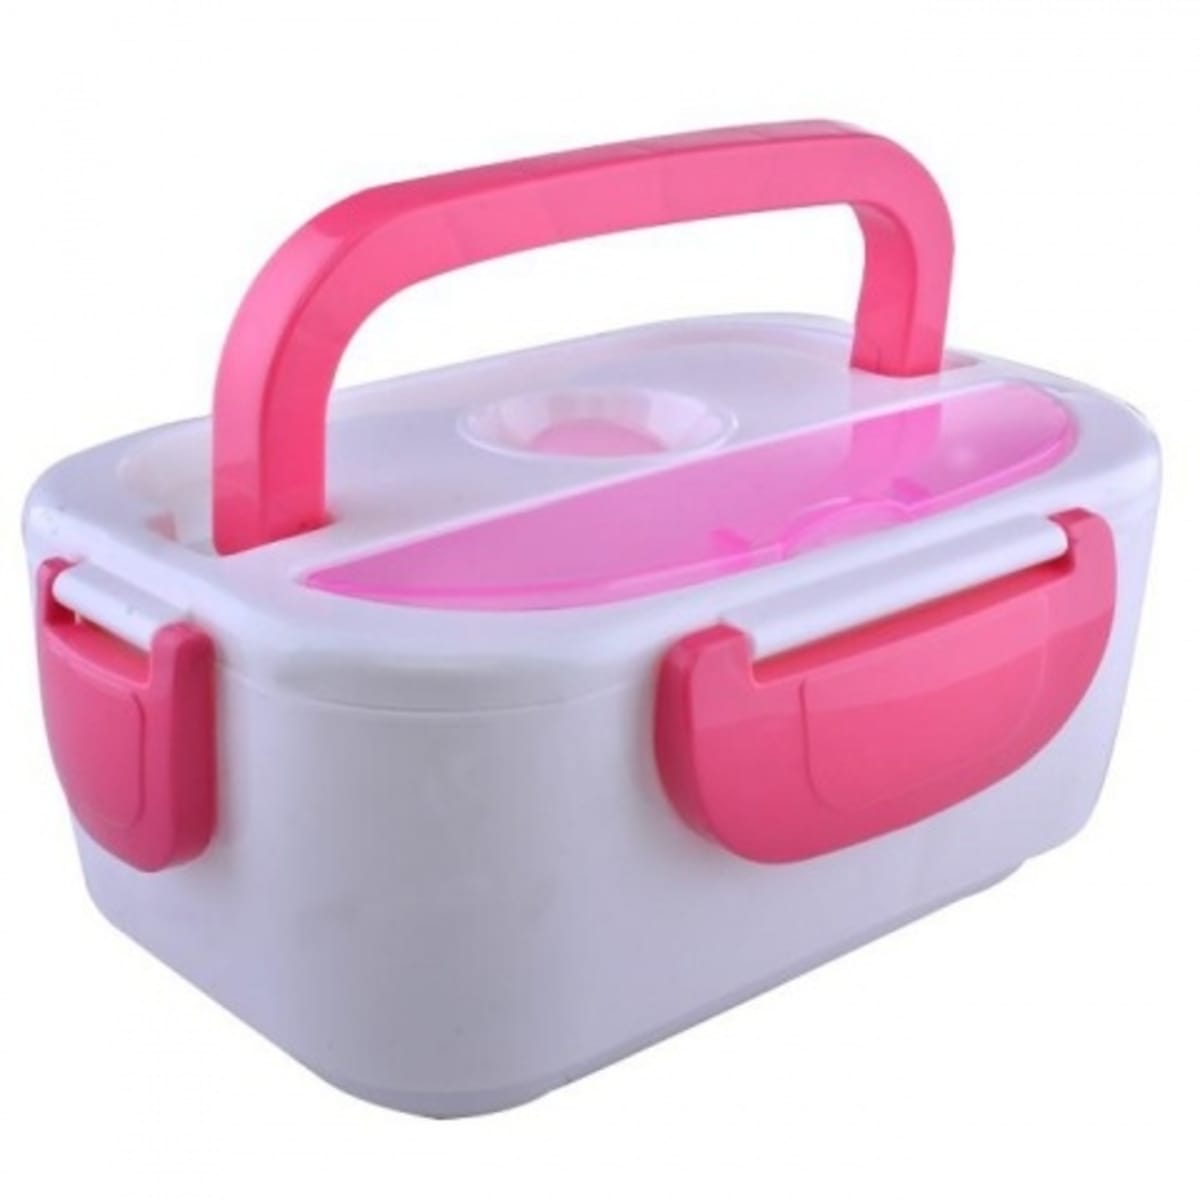 Multifunction Electric Lunch box - Pink